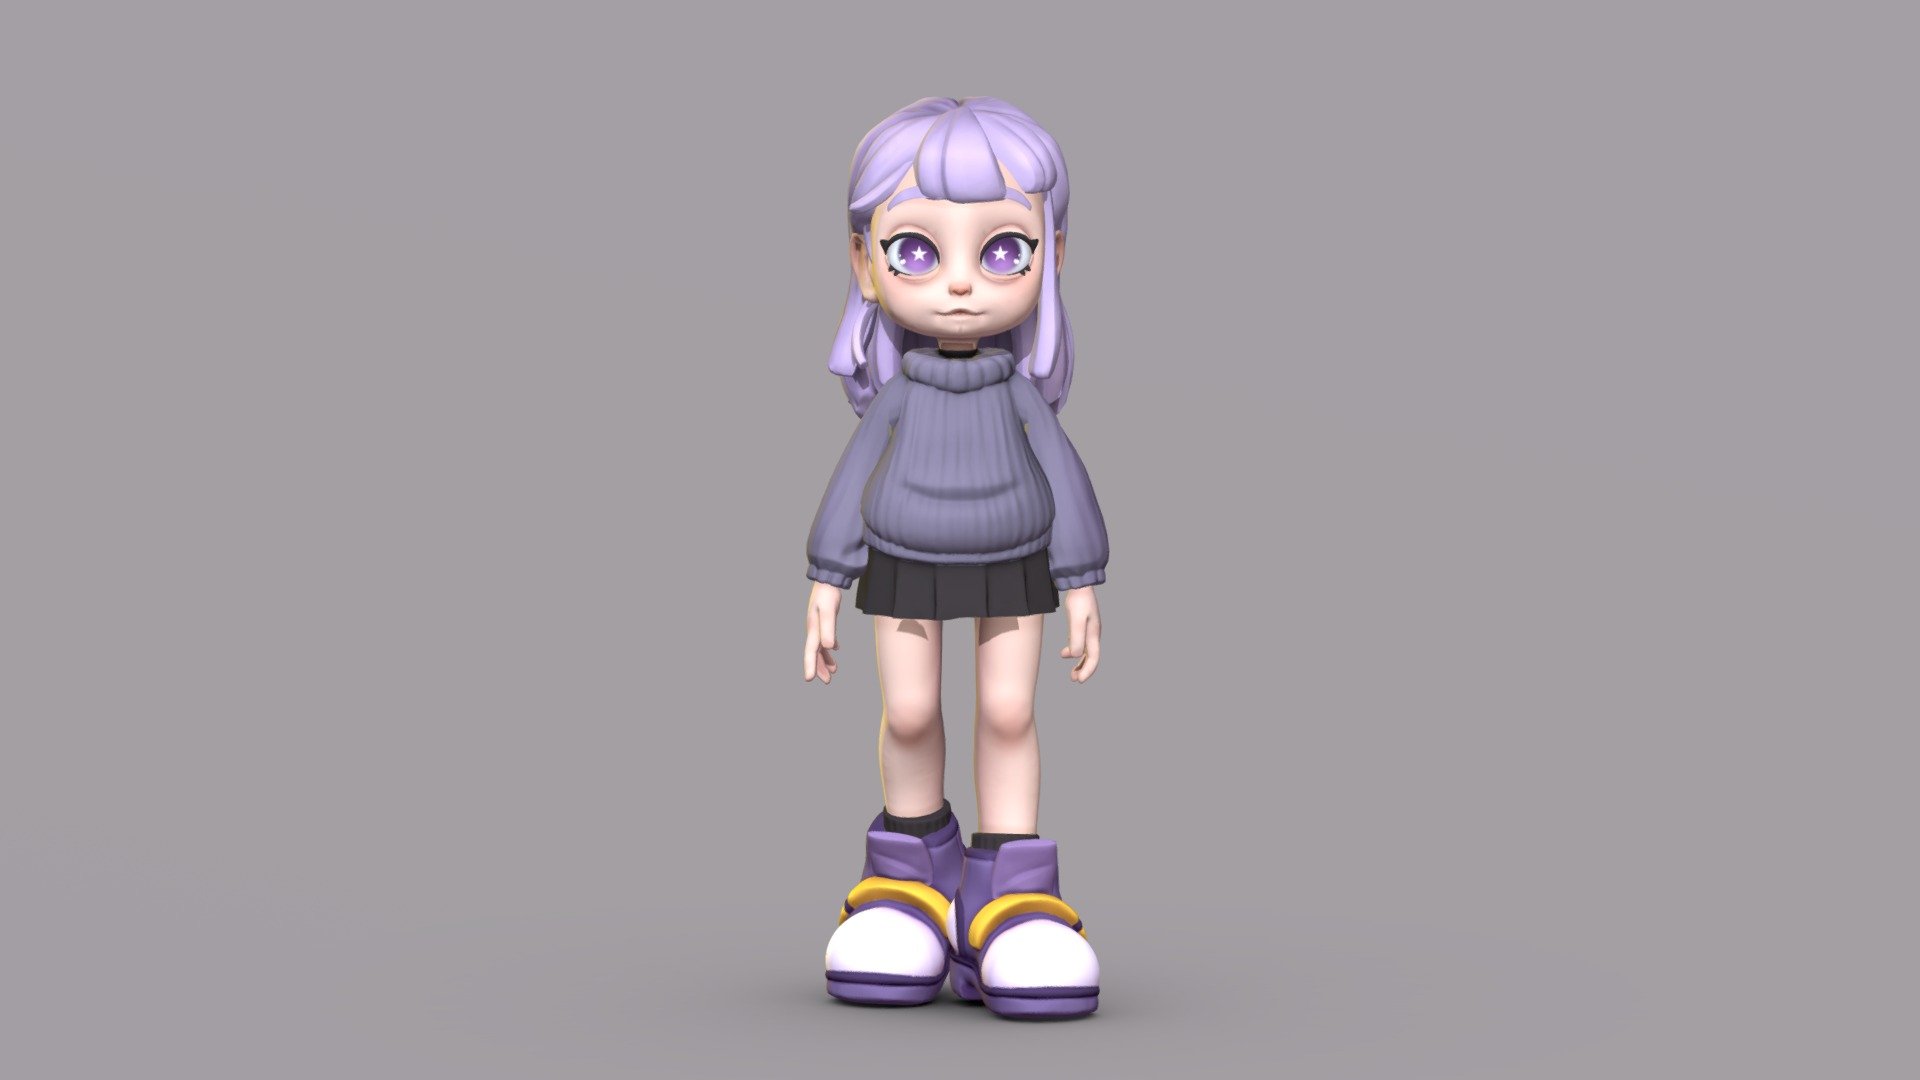 an original character made to practice modelling.
Unrigged but an A-pose version is available.

sculpted in Zbrush
textured in Substance Painter - [Original] Soft and Stylized Girl in purple - Download Free 3D model by Kanna-Nakajima 3d model